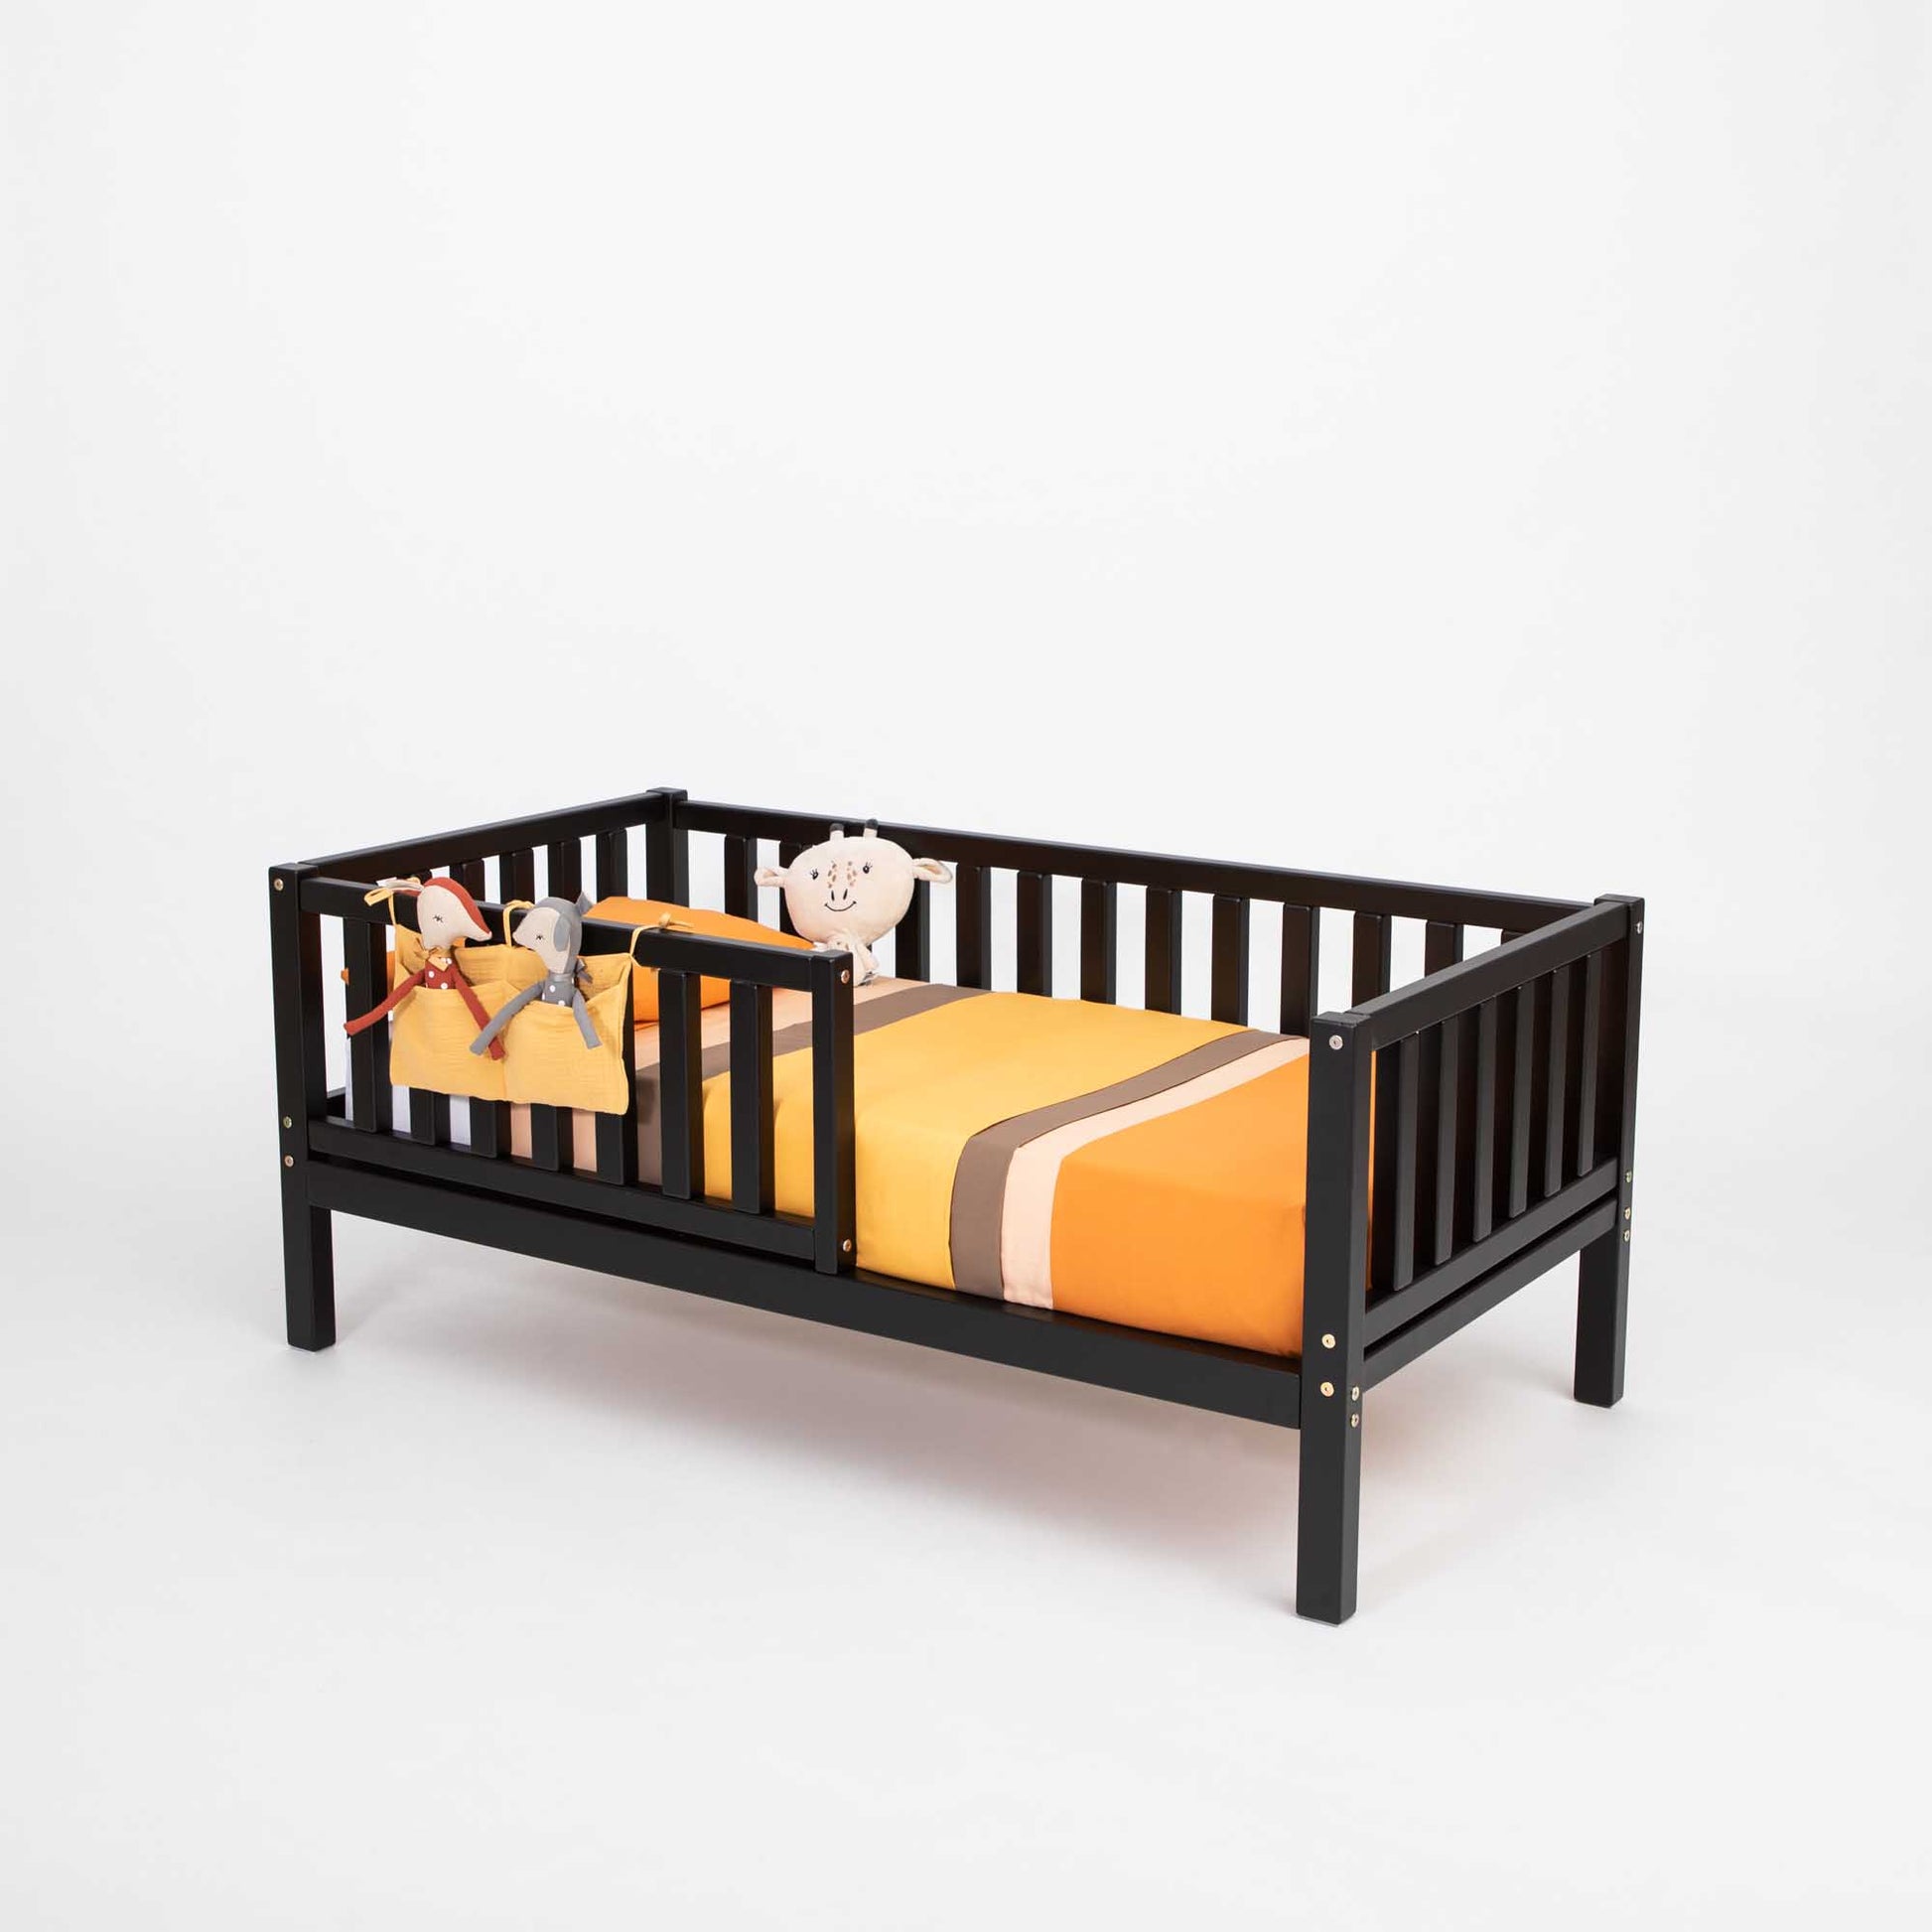 An orange and black striped 2-in-1 toddler bed on legs with a vertical rail fence and a sheet, by Sweet Home From Wood.